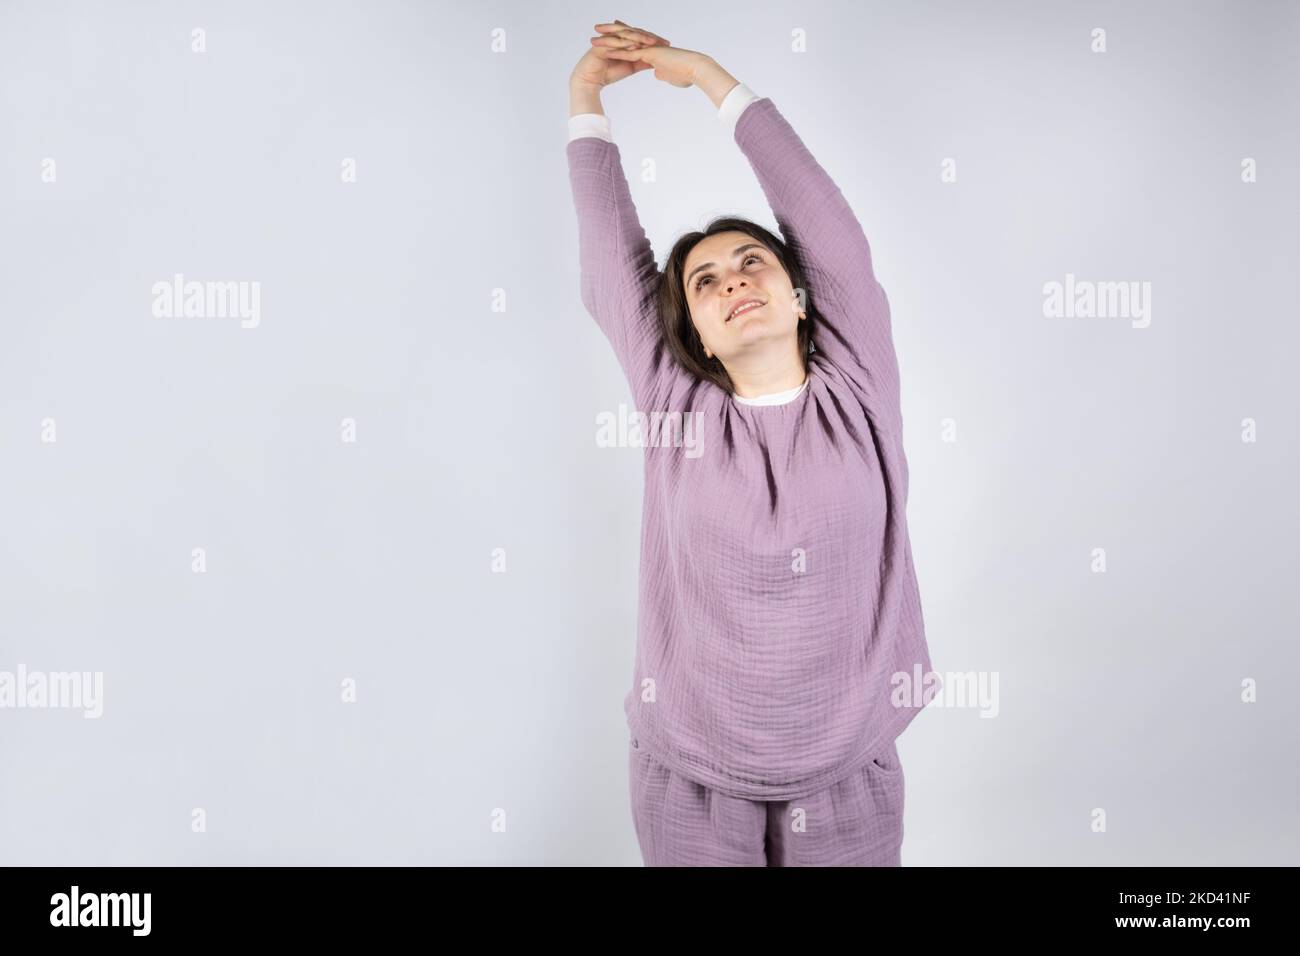 Young brunette woman in muslin lavender pajamas sleep clothes stretches by raising her arms up. Stock Photo